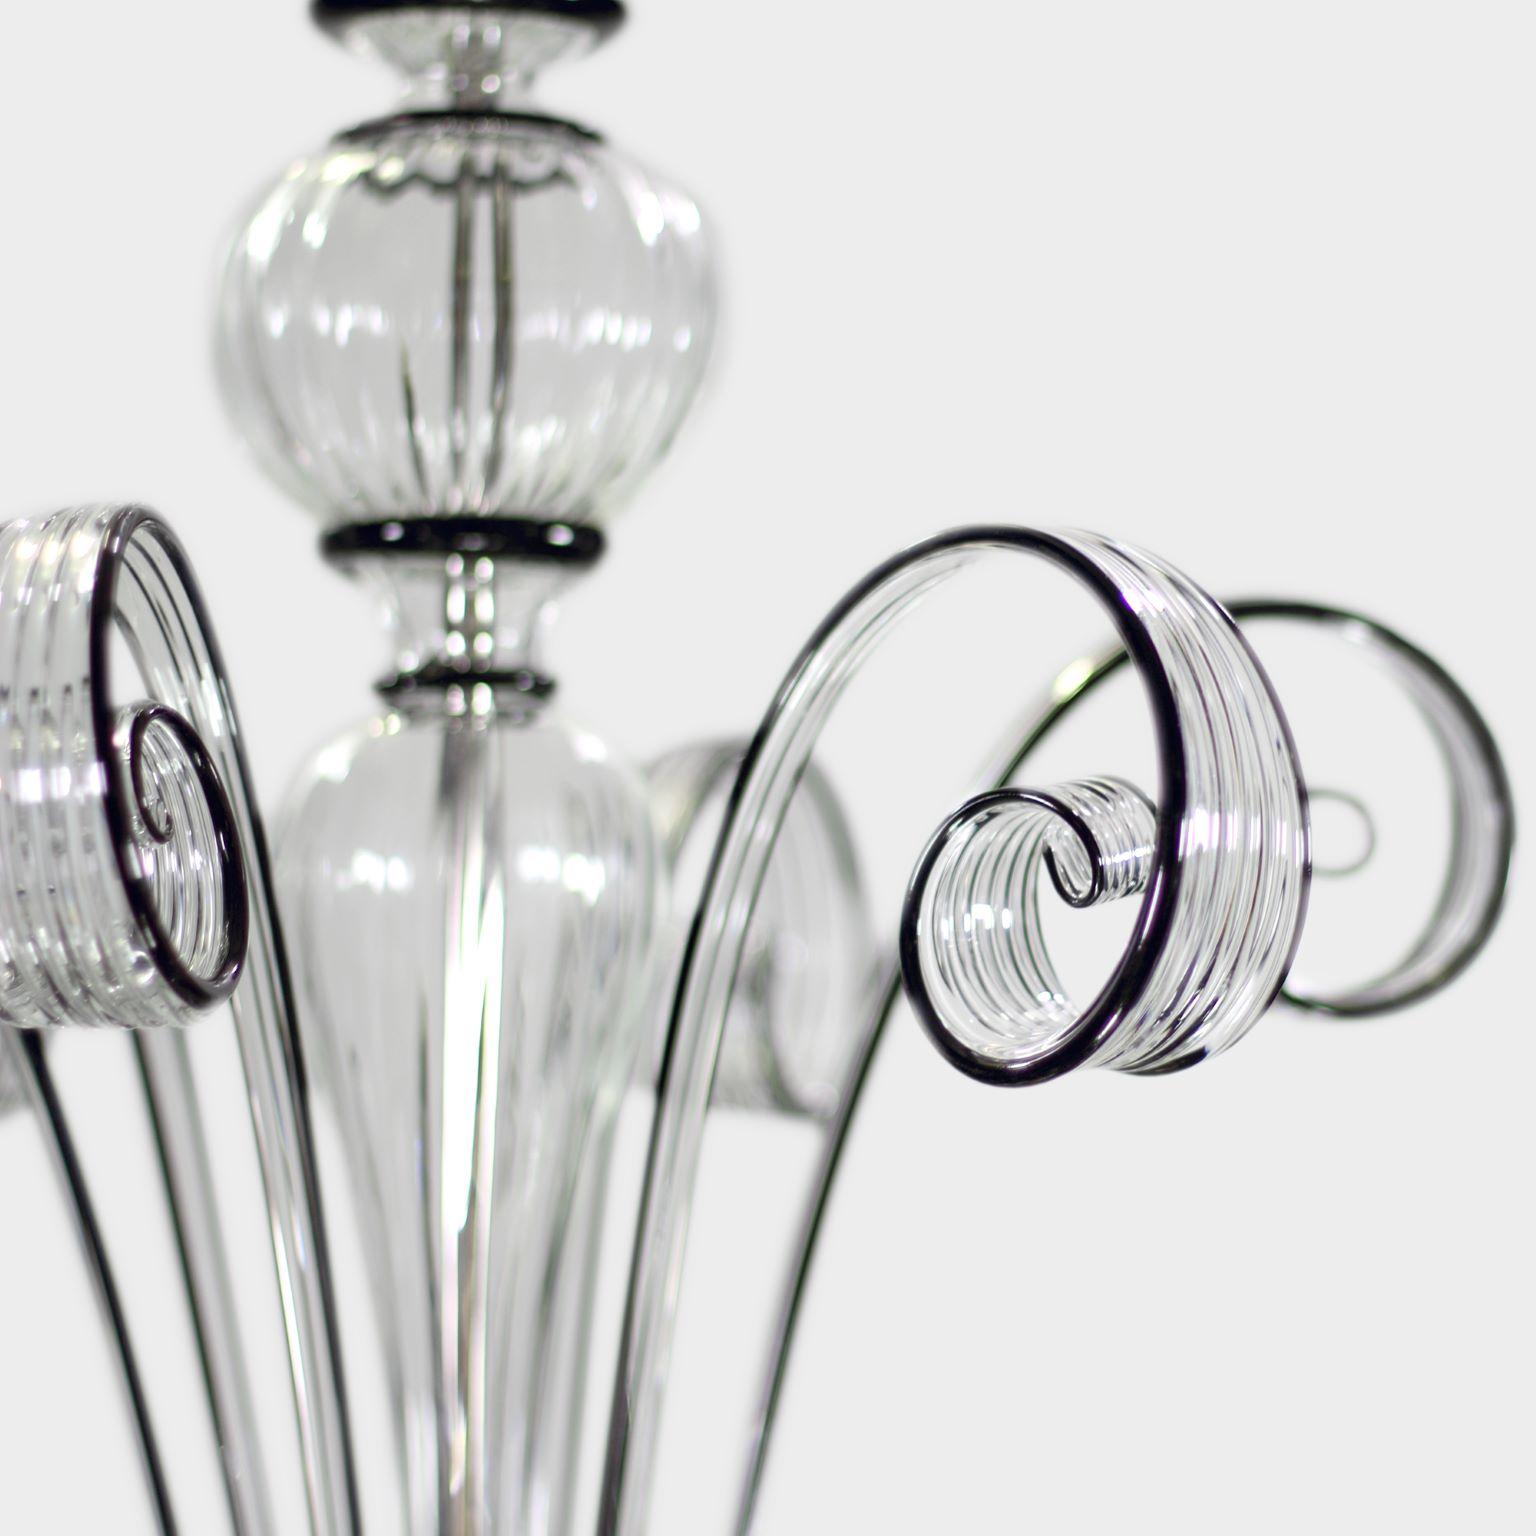 Contemporary Italian Chandelier 5 Arms Clear Murano Glass Black Details by Multiforme For Sale